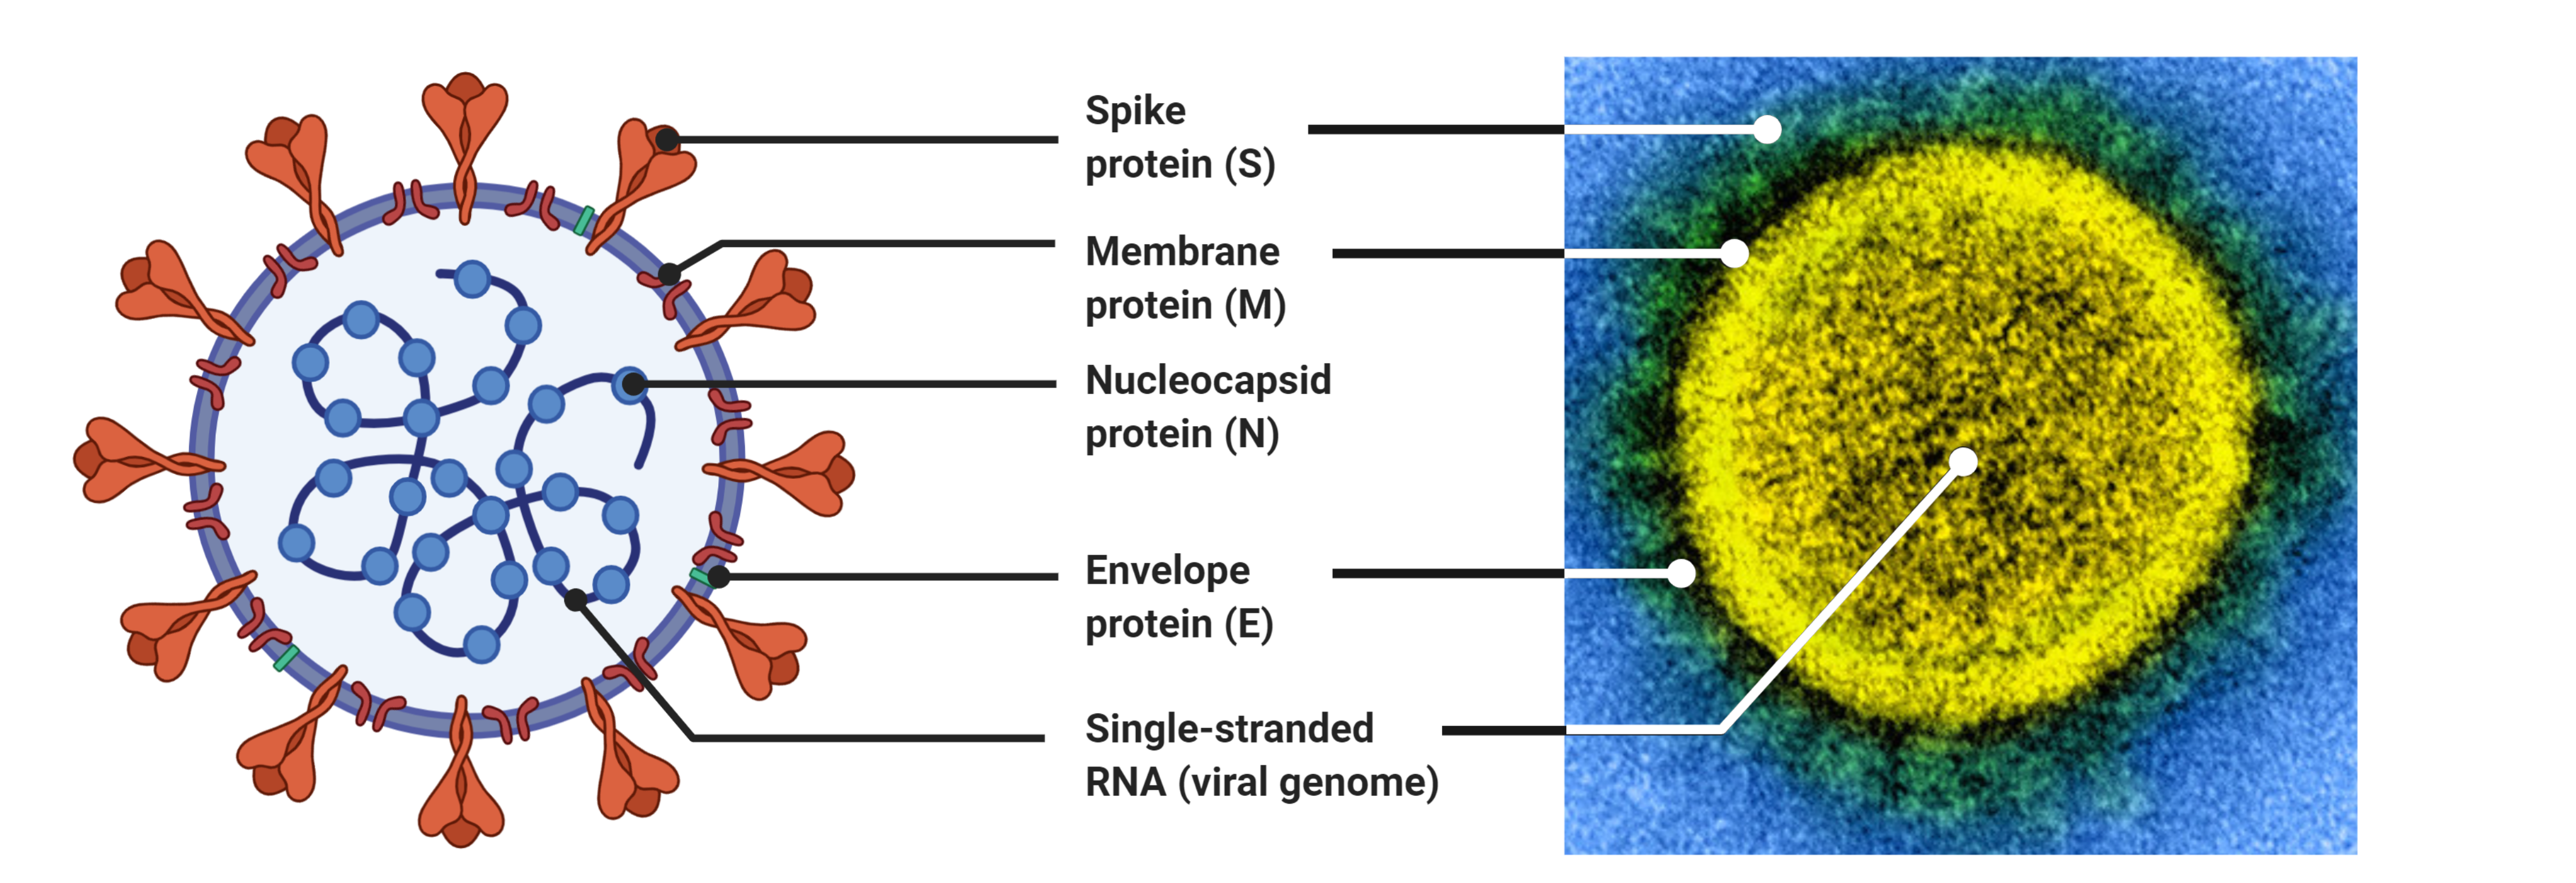 Figure 6: Structure of the SARS-CoV-2 virus. The development of vaccines depends on the immune system recognizing the virus. Here, the structure of SARS-CoV-2 is represented both in the abstract and against a visualization of the virion. The abstracted visualization was made using BioRender [1094] and the microscopy was conducted by the National Institute of Allergy and Infectious Diseases [1095].